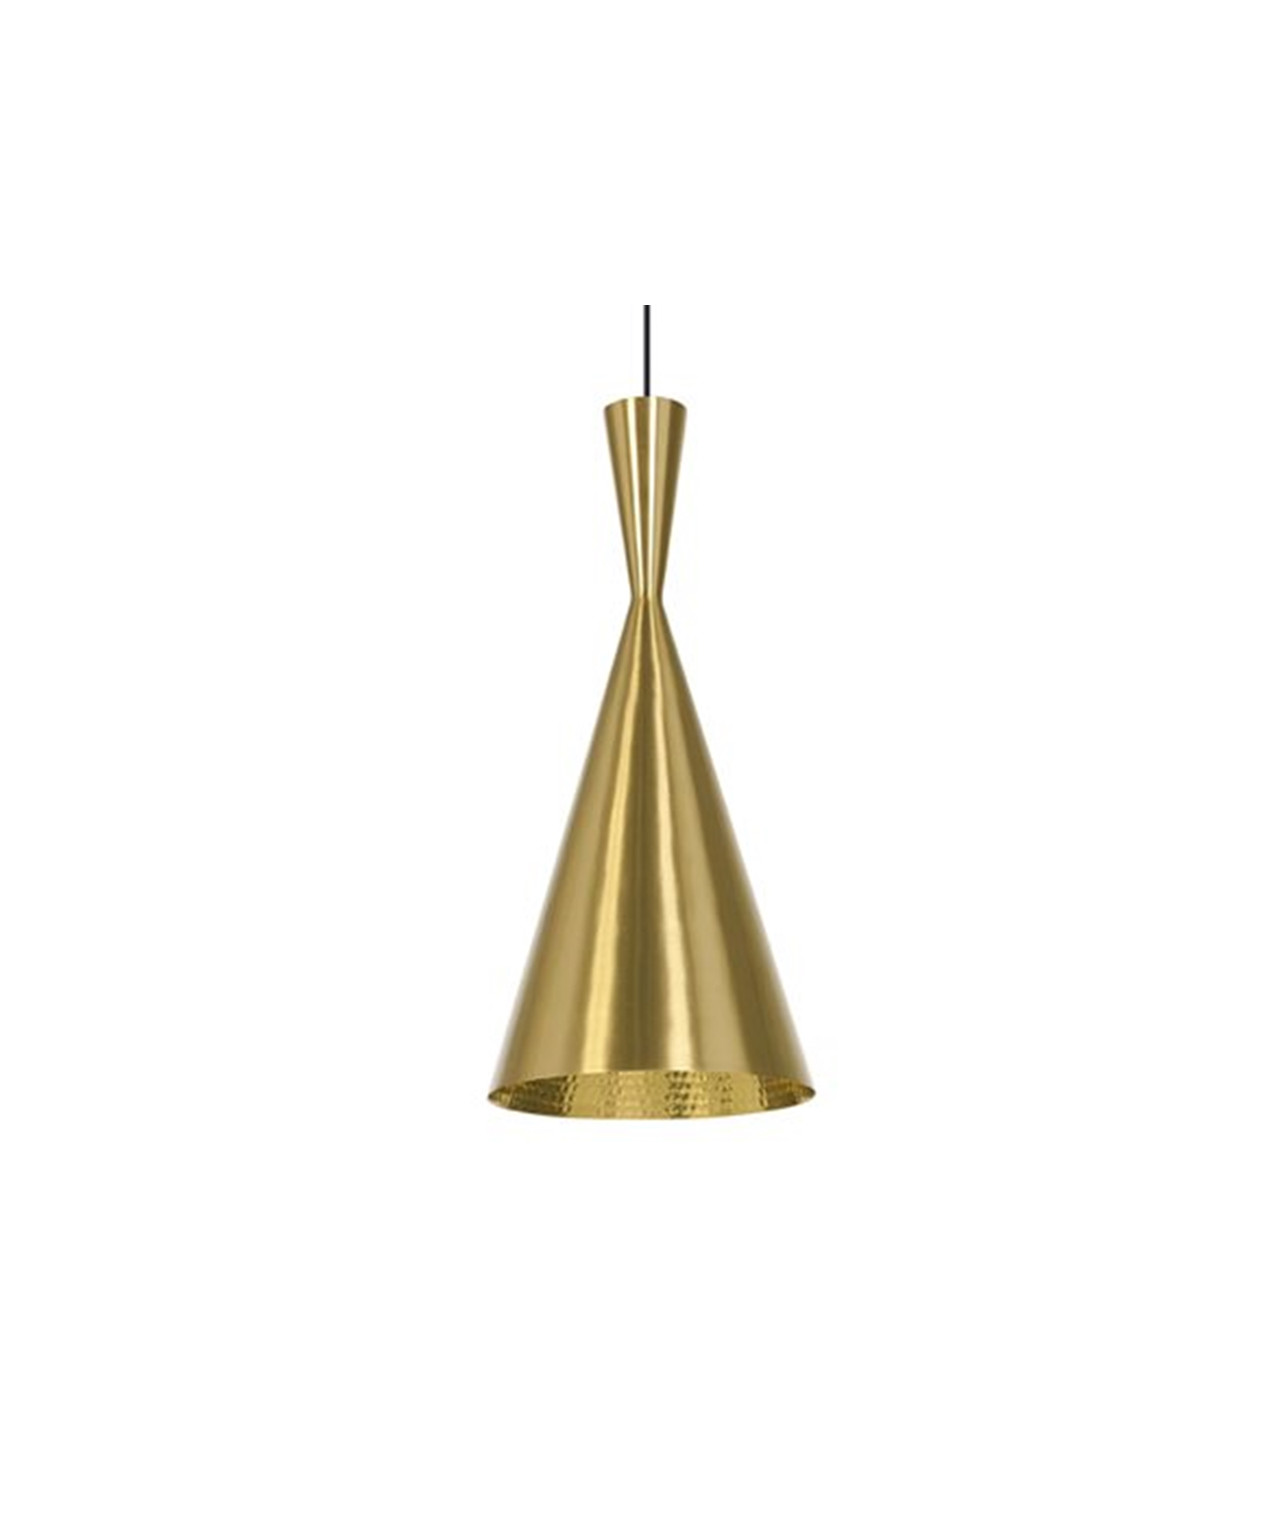 Image of Beat Light Tall LED Pendelleuchte Messing - Tom Dixon bei Lampenmeister.ch